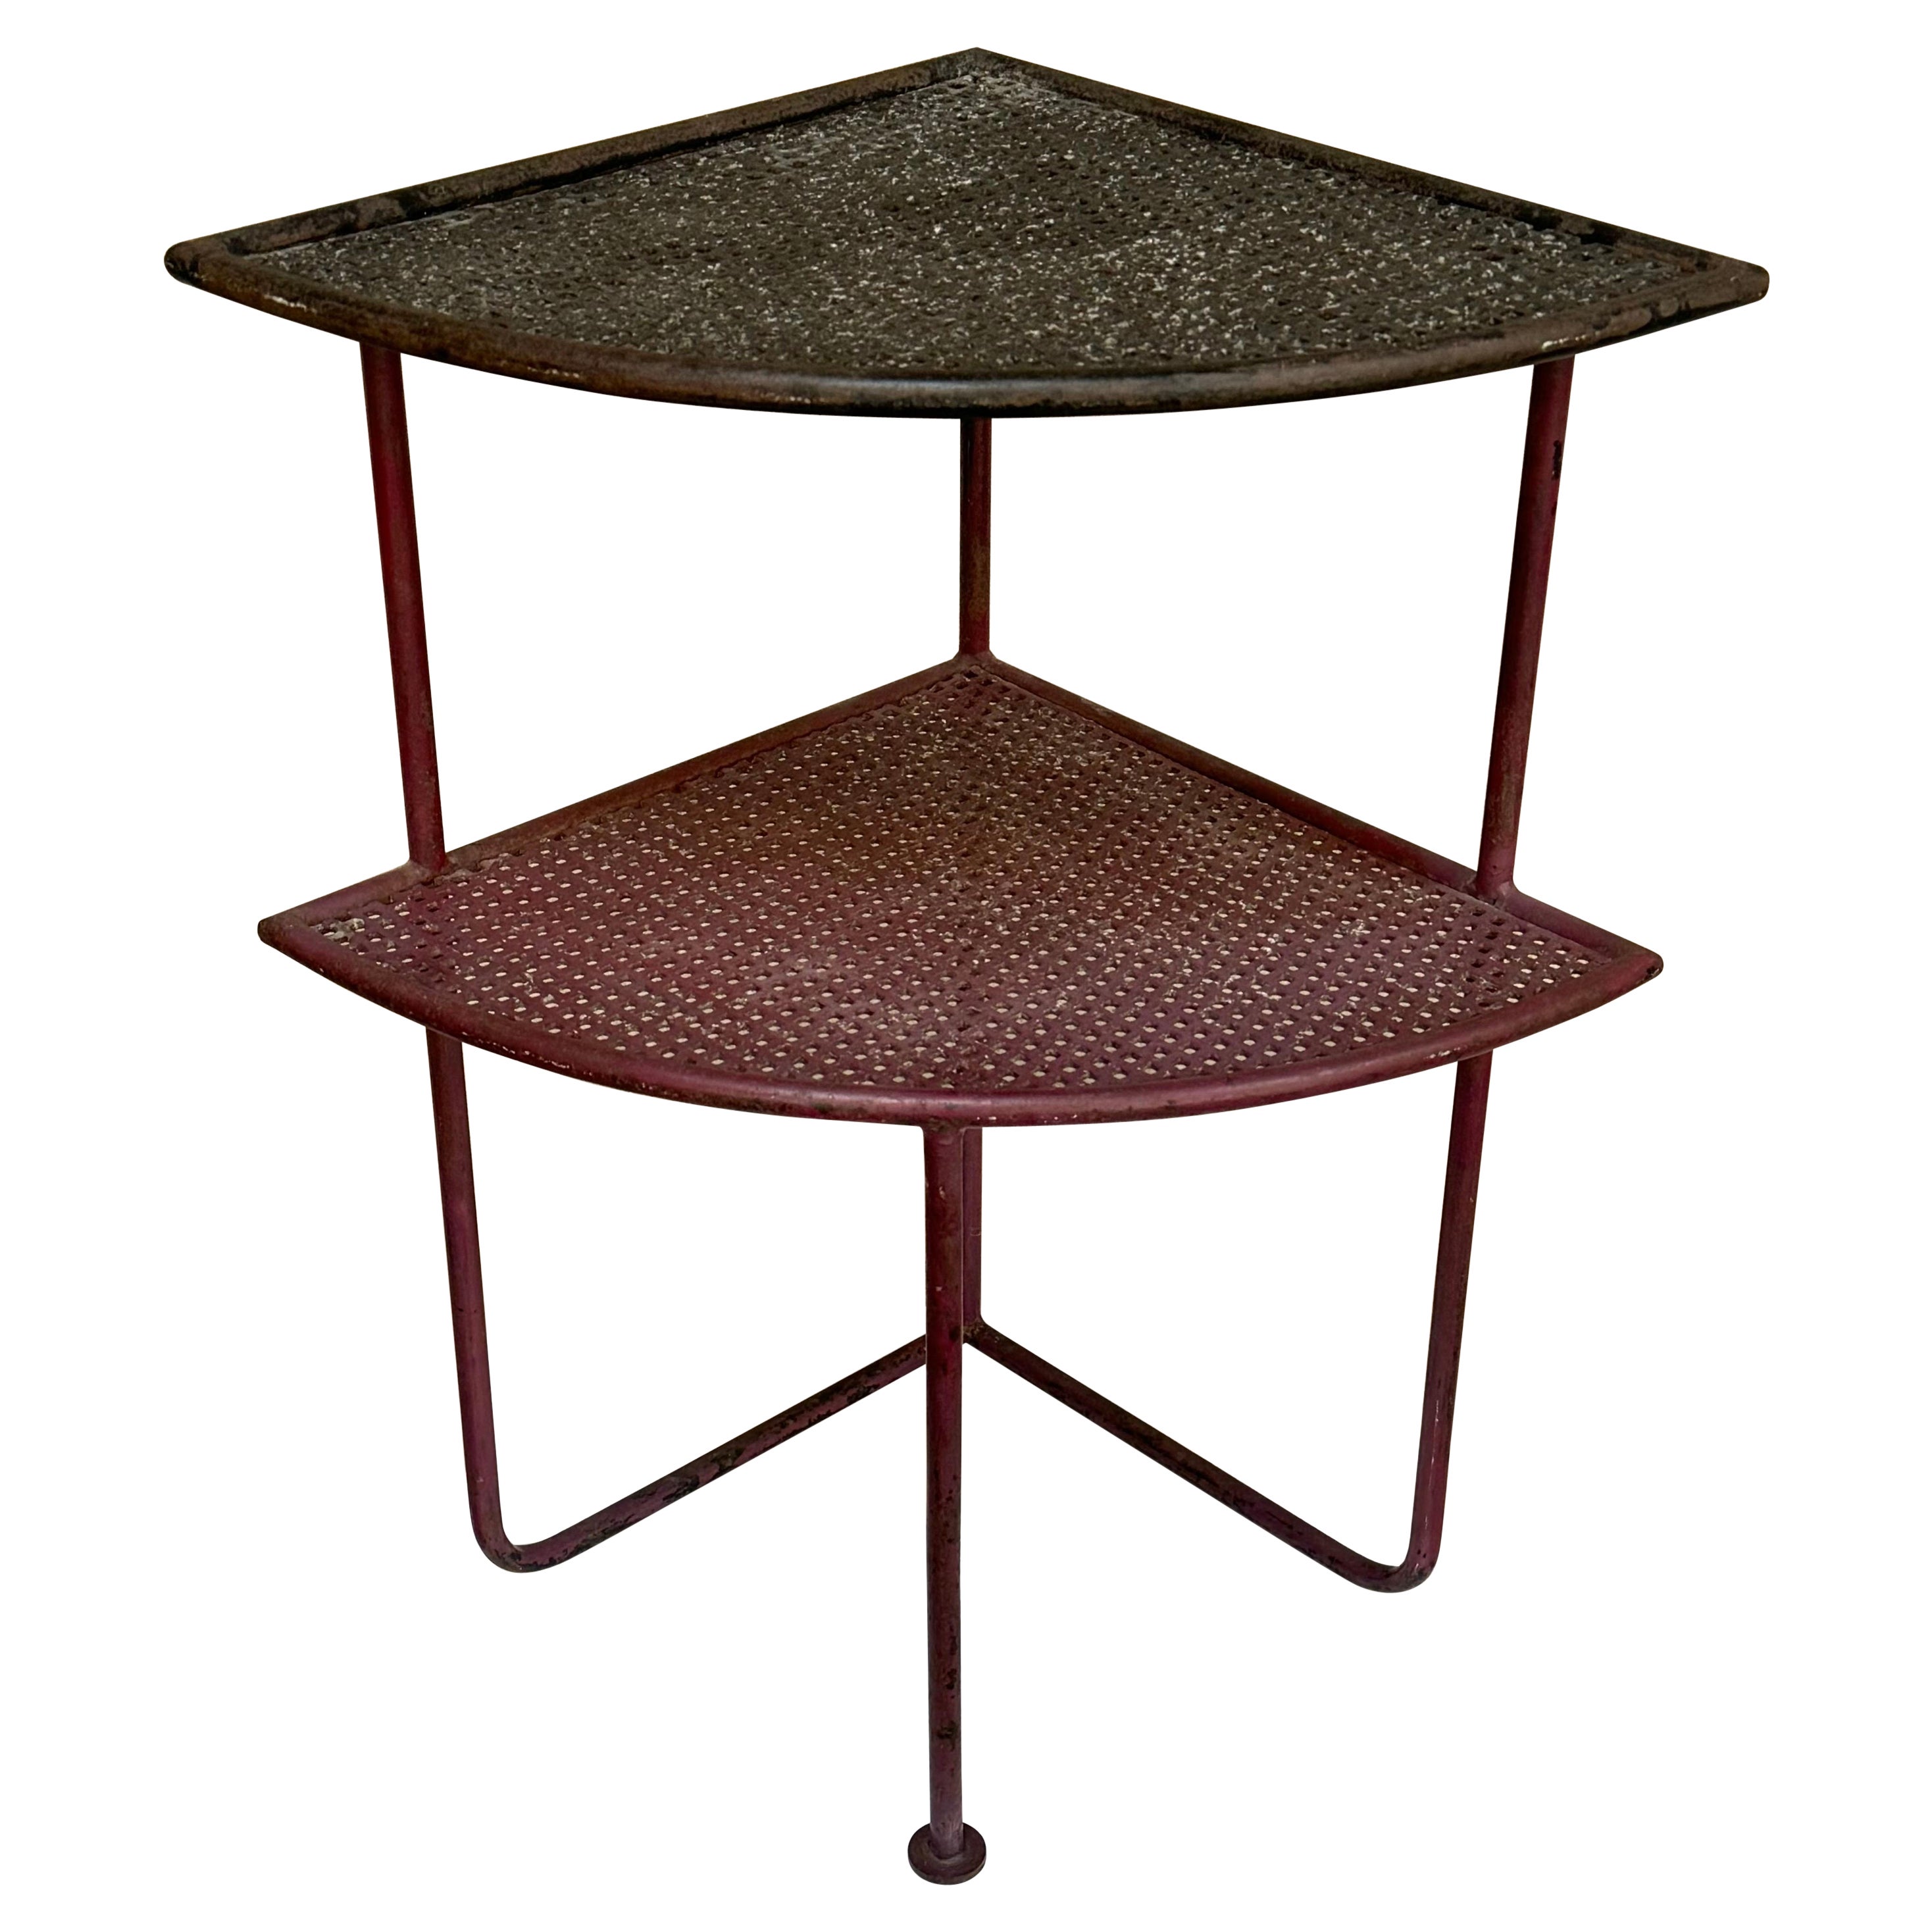 1950s Modernist French Iron with Perforated Metal Shelves Side Table